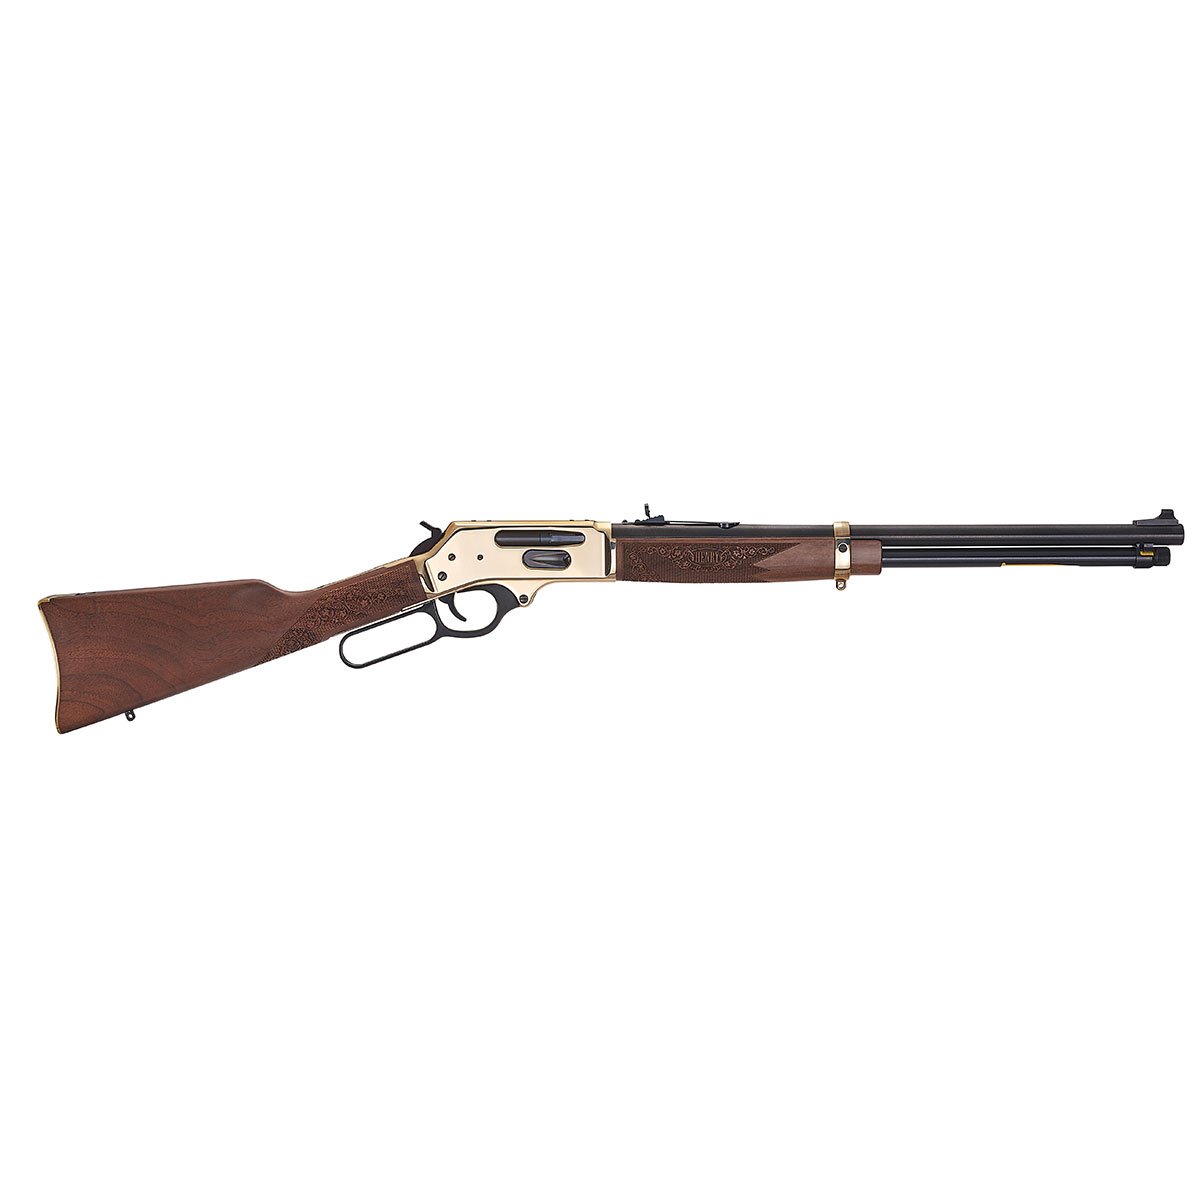 HENRY REPEATING ARMS - SIDE GATE 360 BUCKHAMMER LEVER ACTION RIFLE